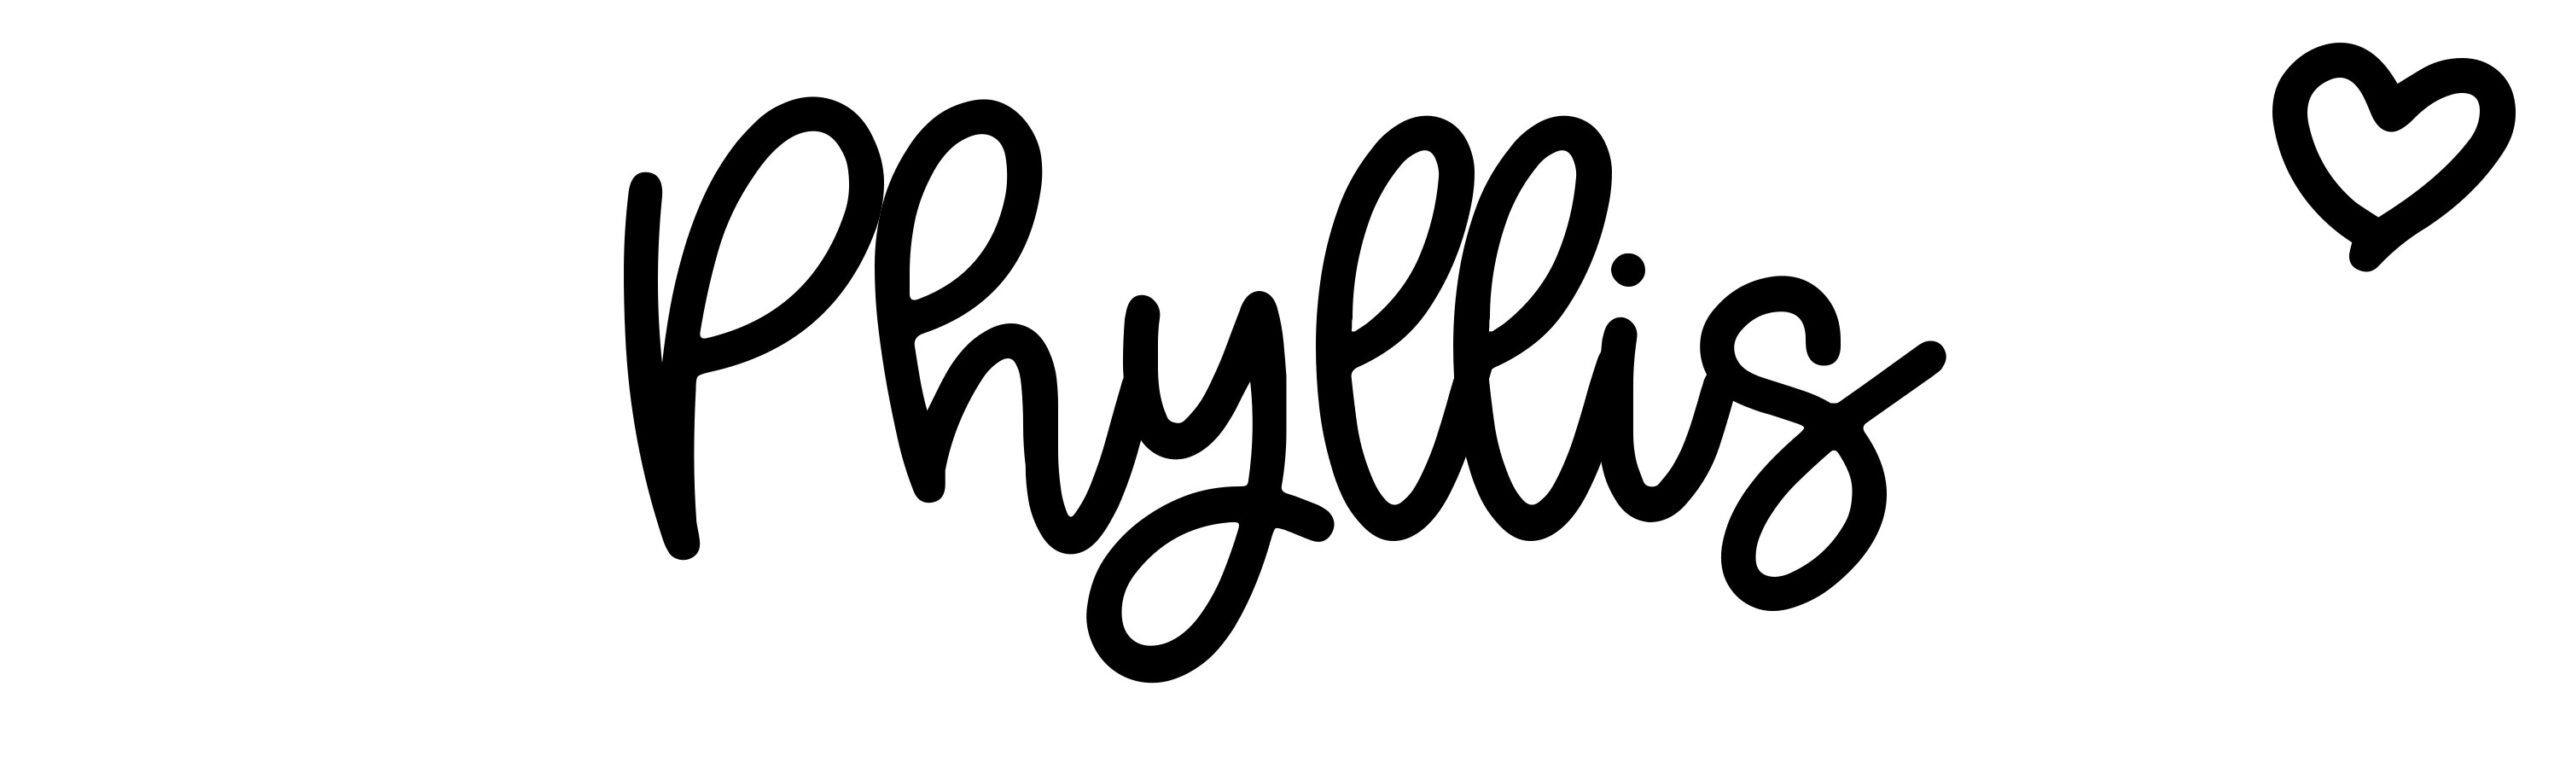 Phyllis - Name meaning, origin, variations and more